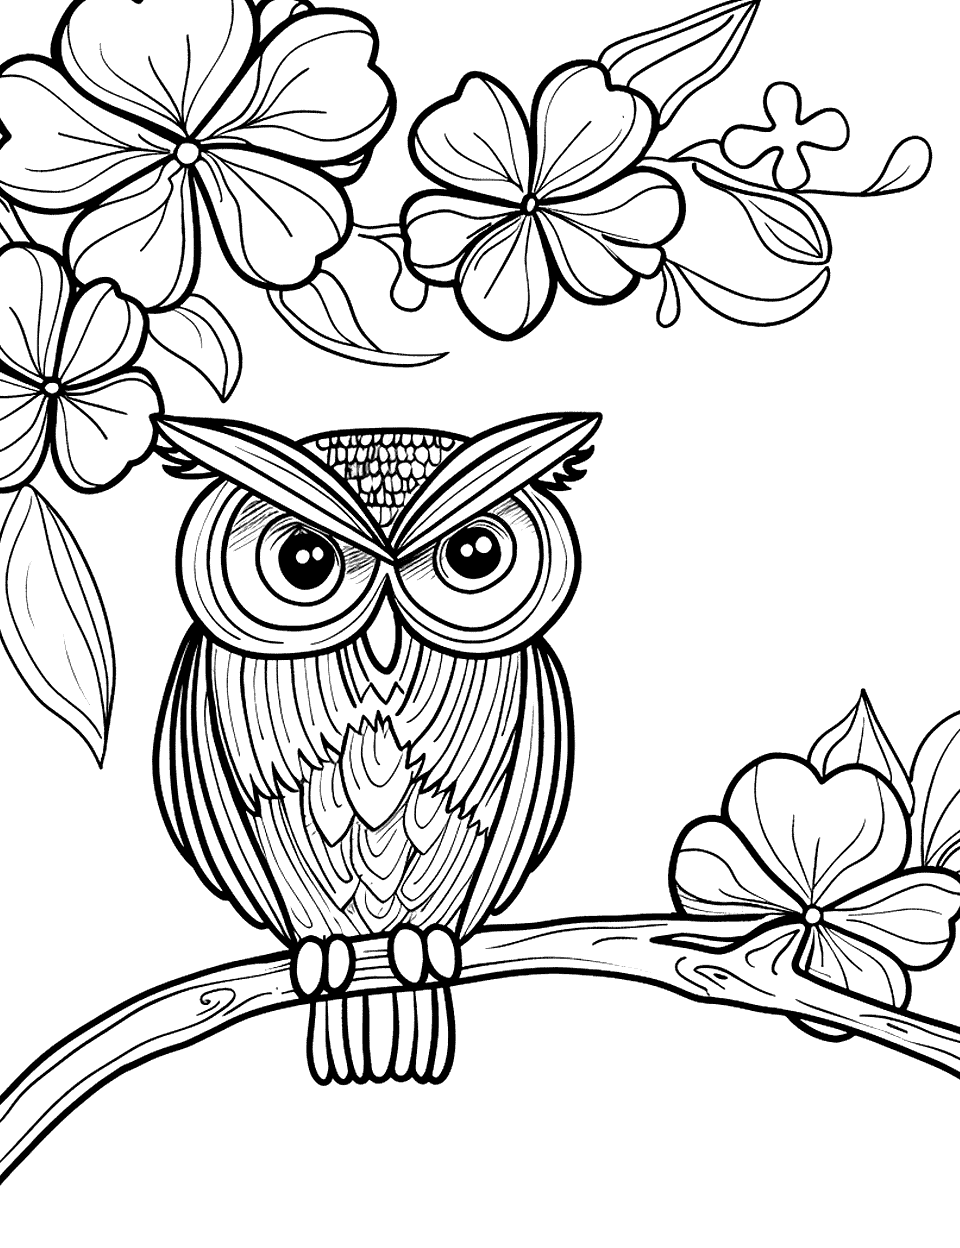 Owl Perched on a Shamrock Tree Coloring Page - An owl perched on the branch of a tree, where the leaves are shaped like shamrocks.